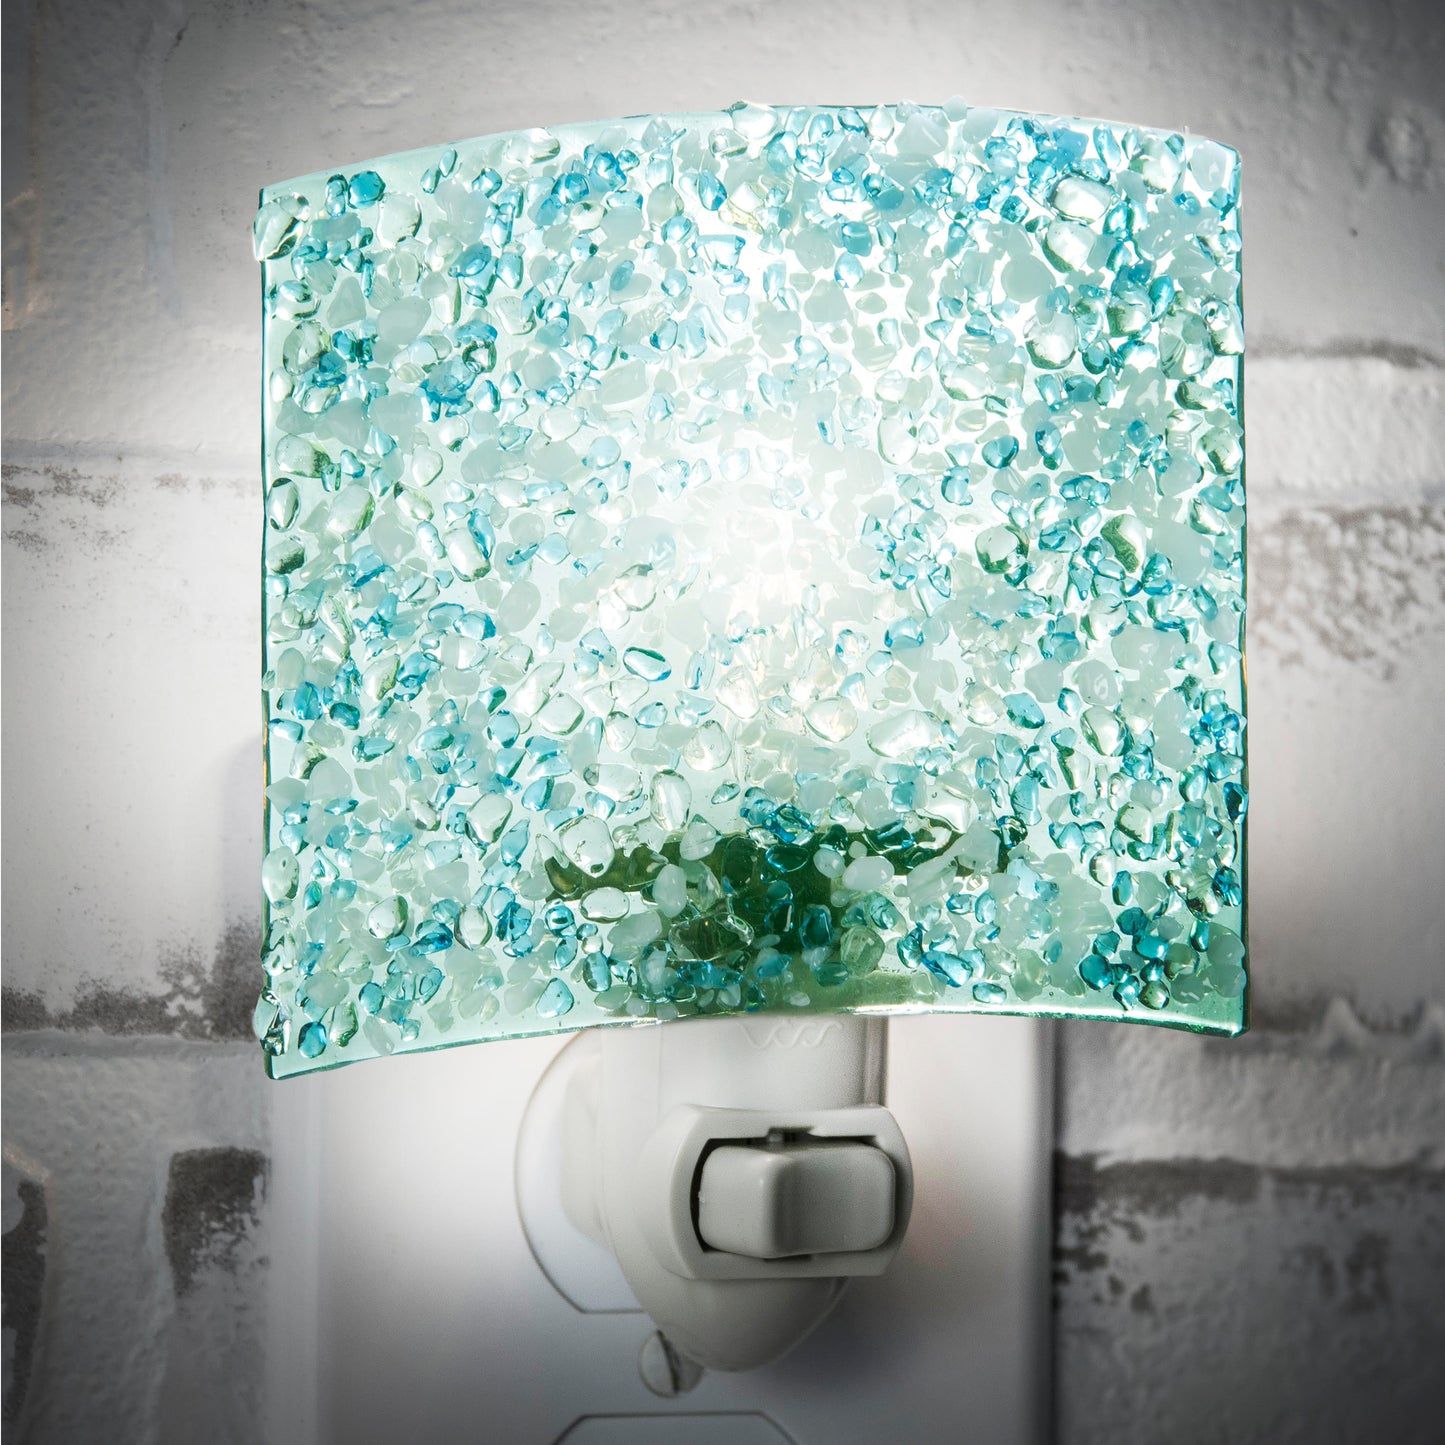 Ntl 155-2 Blue-Green with  Fused Glass Night Light